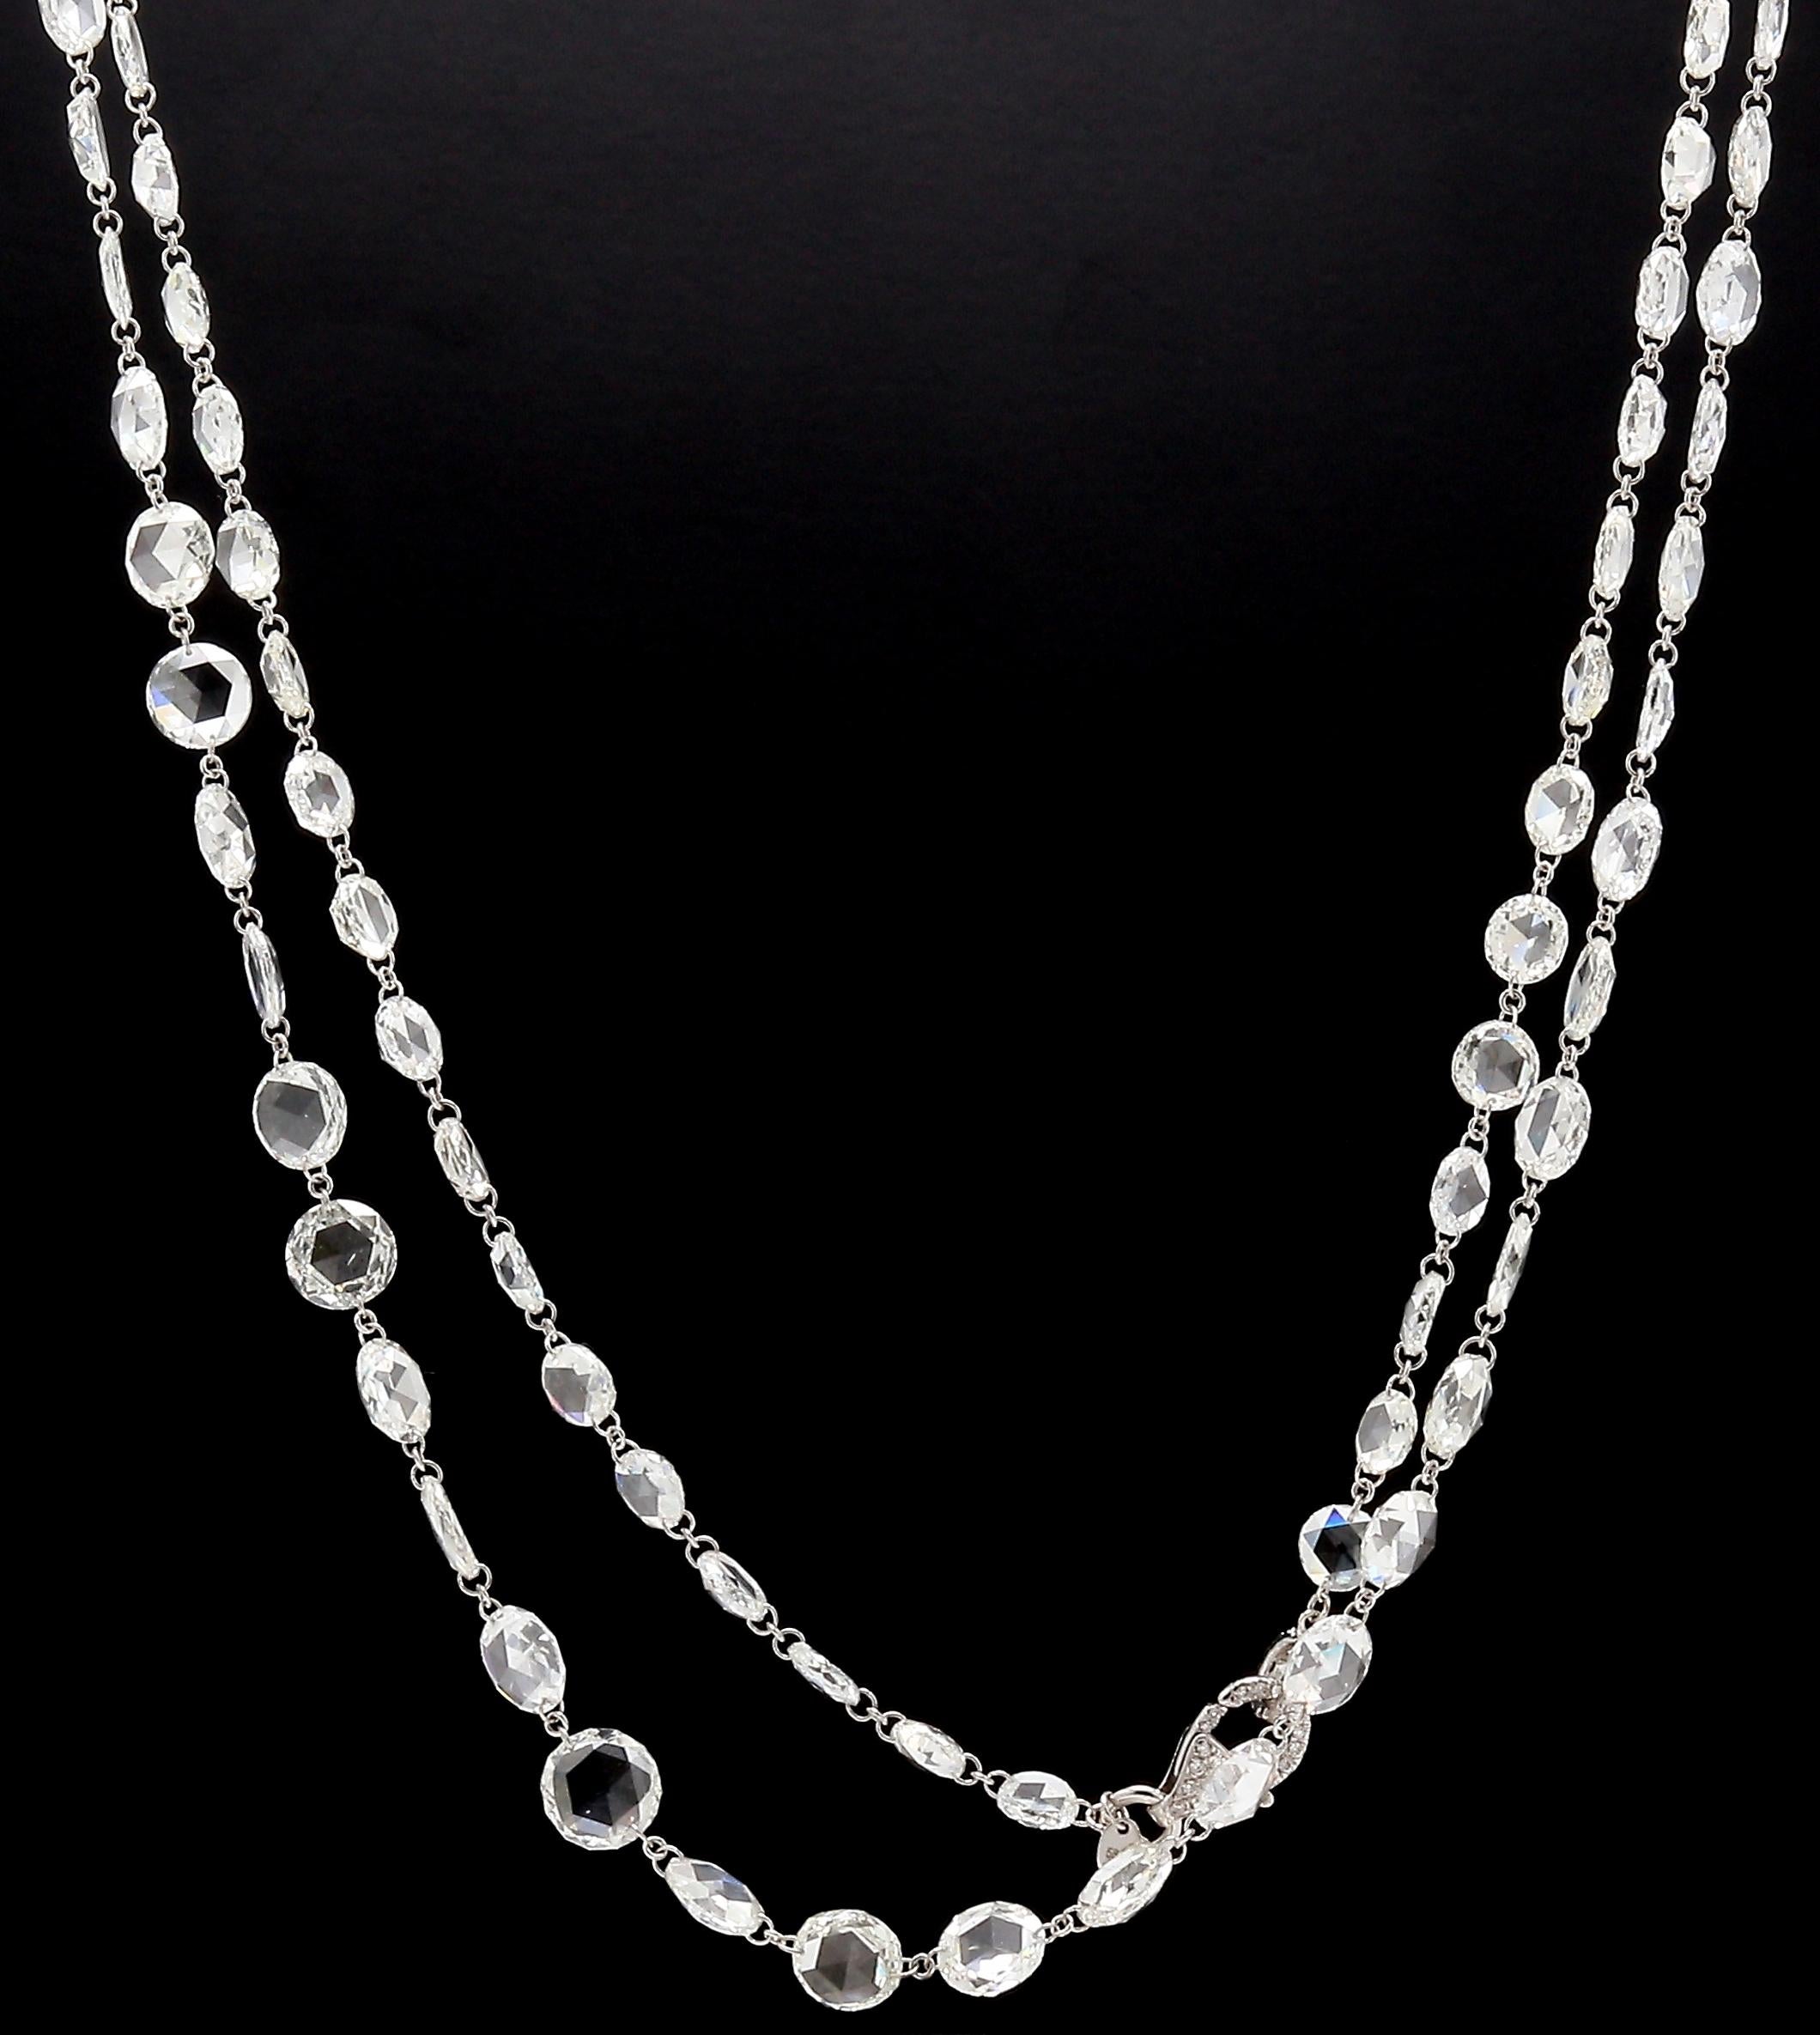 PANIM 56.60 Rose Cut Diamond Long Necklace in 18K White Gold

An absolutely exquisite Panim Classic Diamond Rosecut Necklace. Crafted in 18kt White gold, this stunning piece adorns Diamond Rosecut stones, each separated by a delicate gold chain